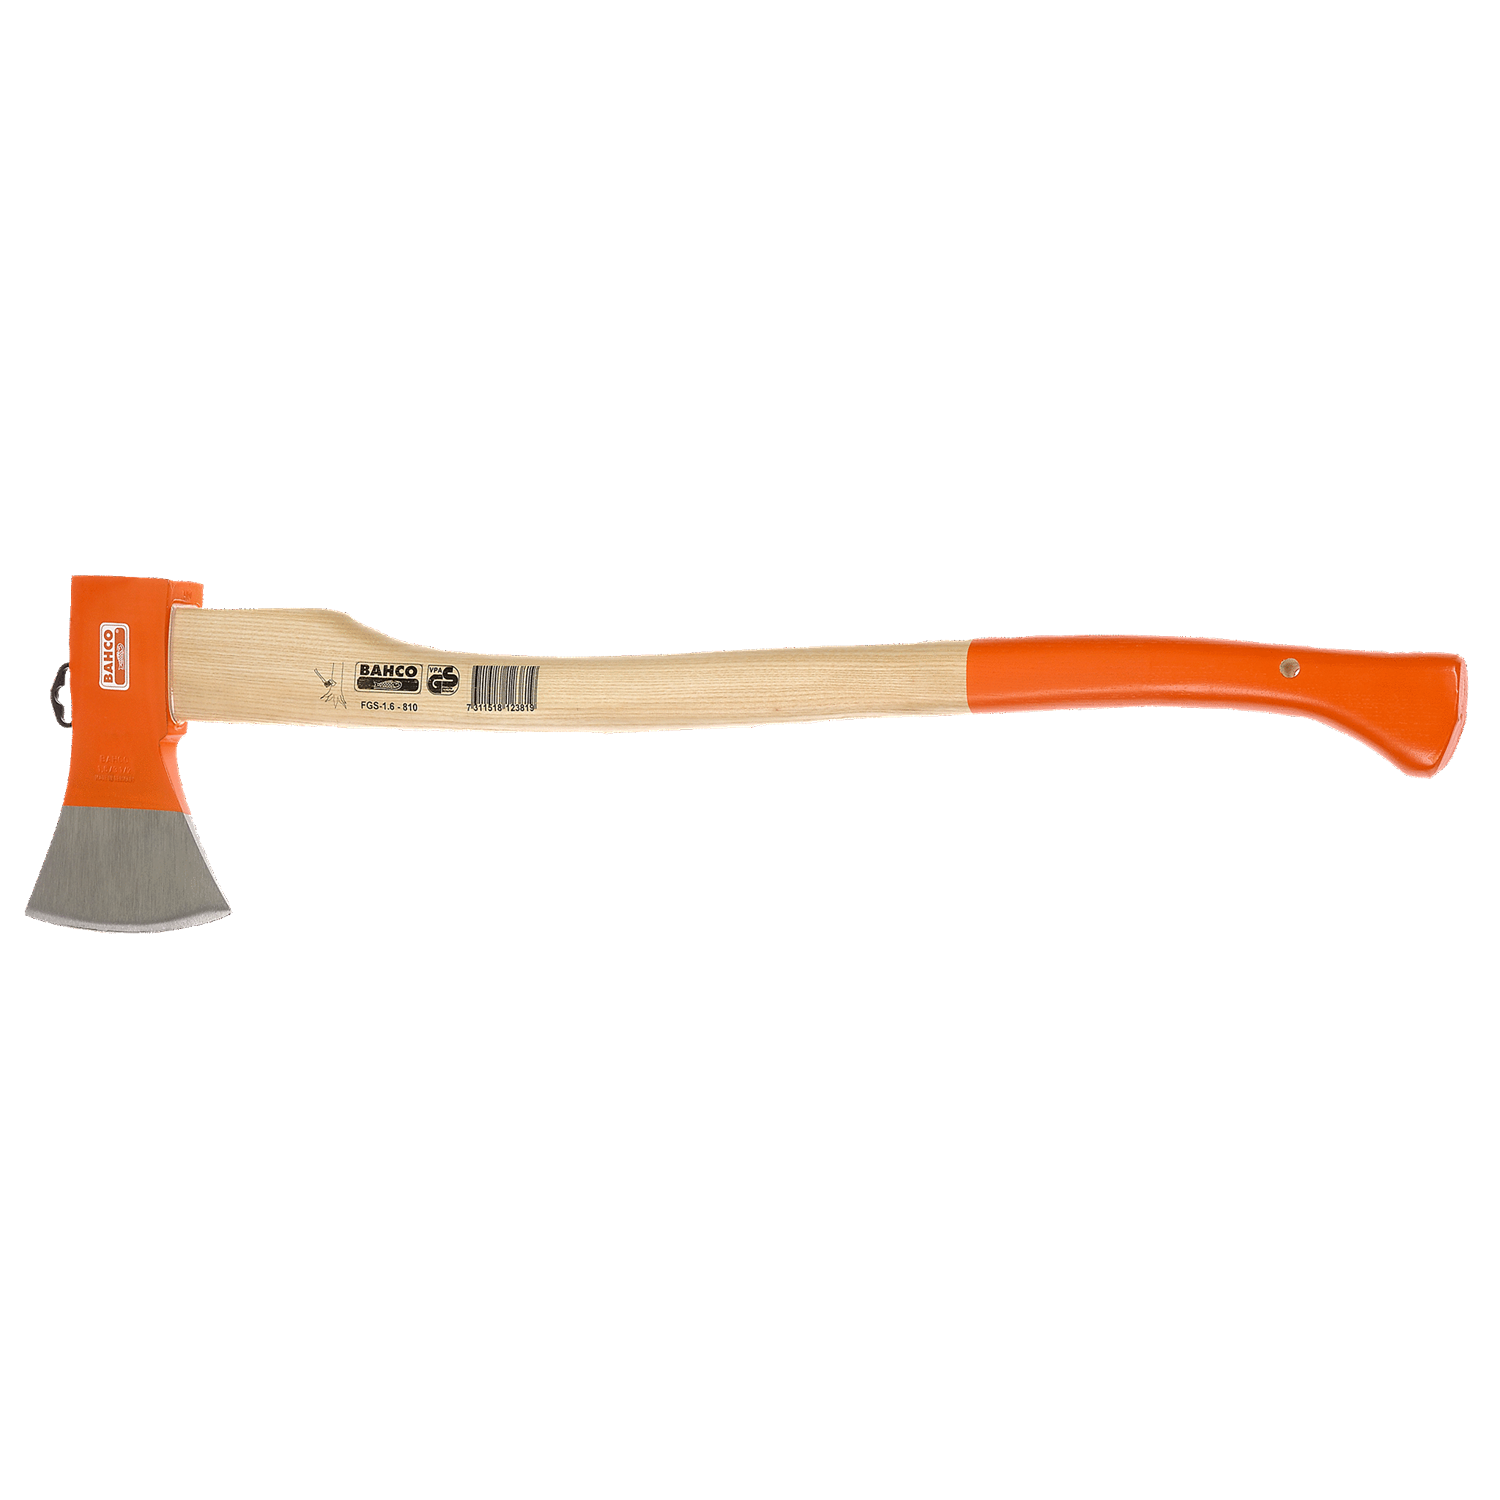 BAHCO FGS-810 Felling Axe with Curved Ash Wood Handle 800 mm - Premium Felling Axe from BAHCO - Shop now at Yew Aik.